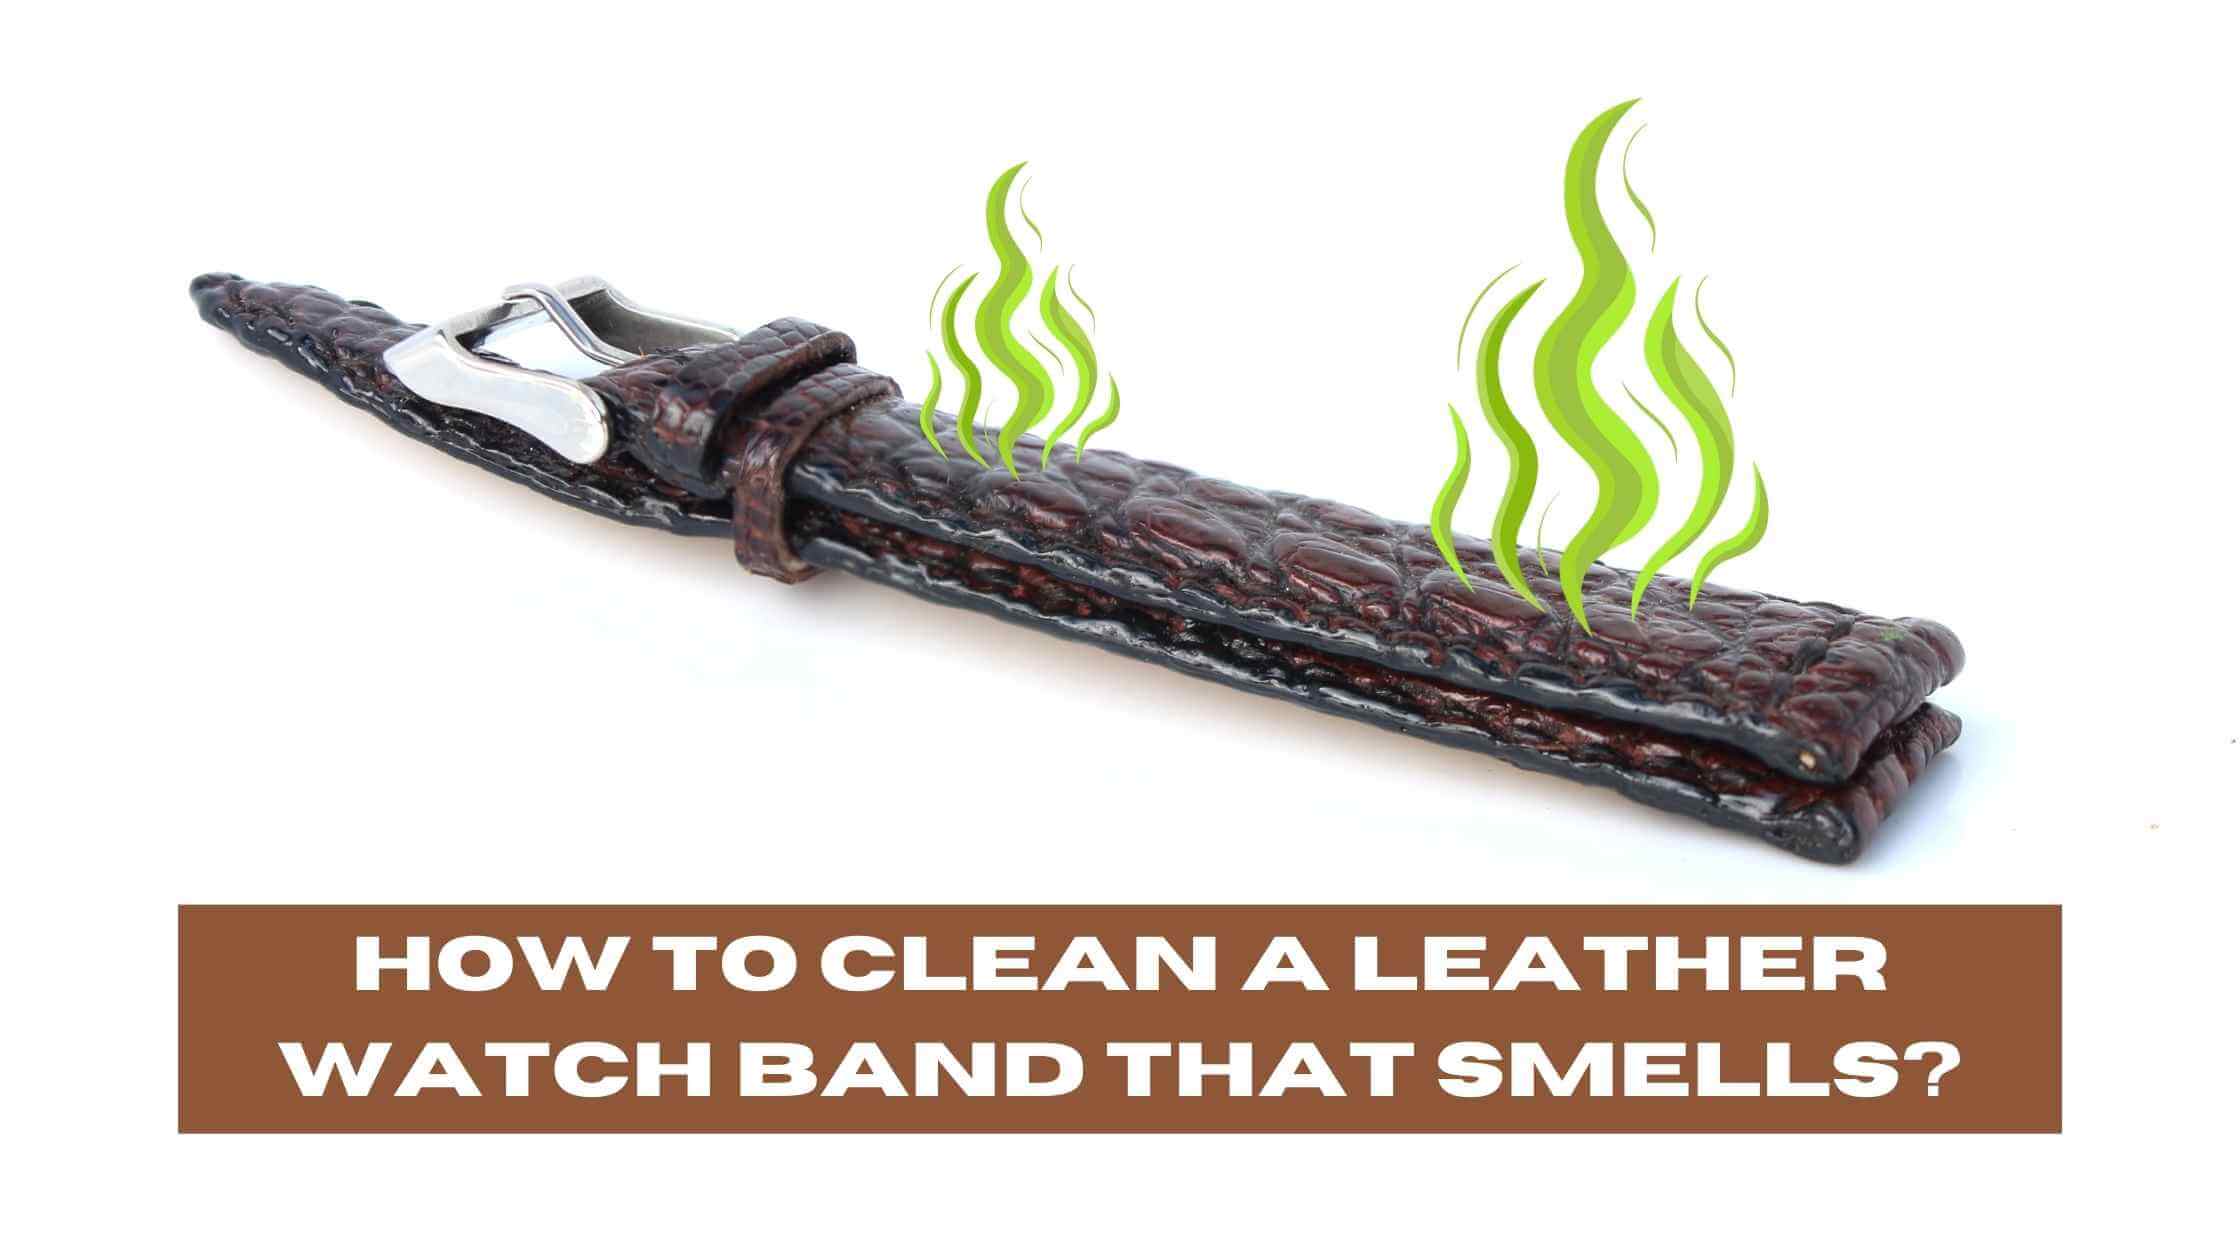 How to Clean a Leather Watch Band That Smells